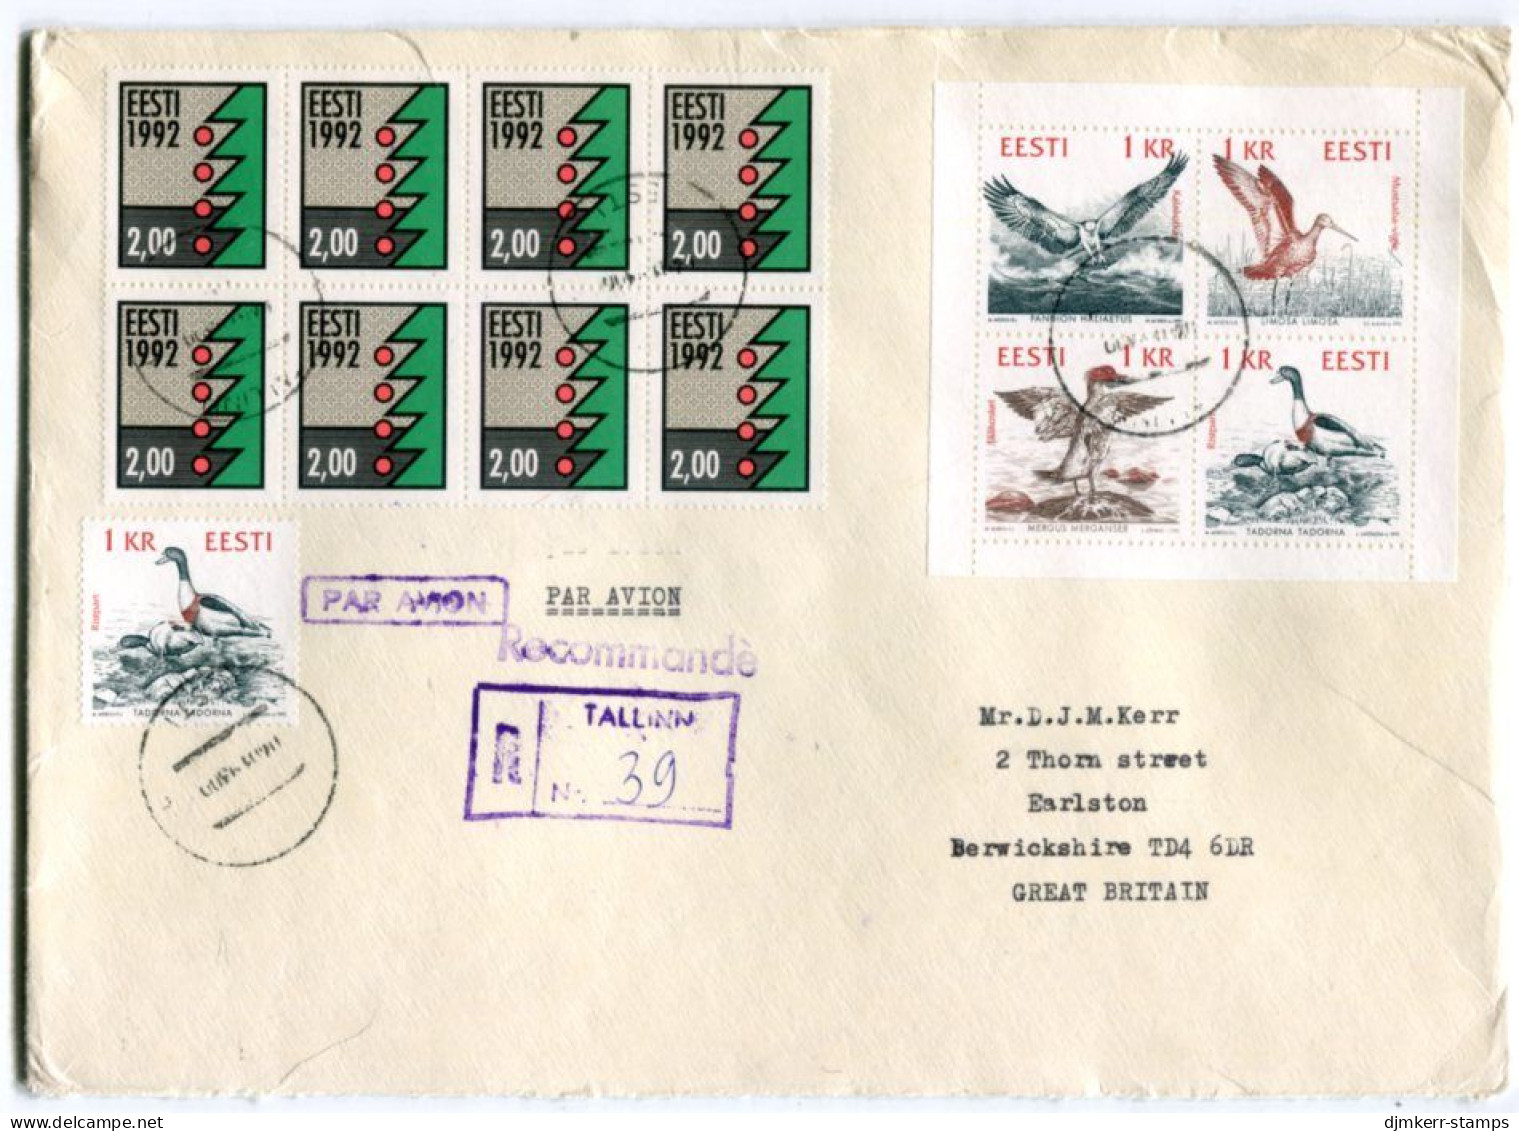 ESTONIA 1992 Registered Cover With Birds And Christmas Stamps.  Michel 188-91, 196x - Estonia